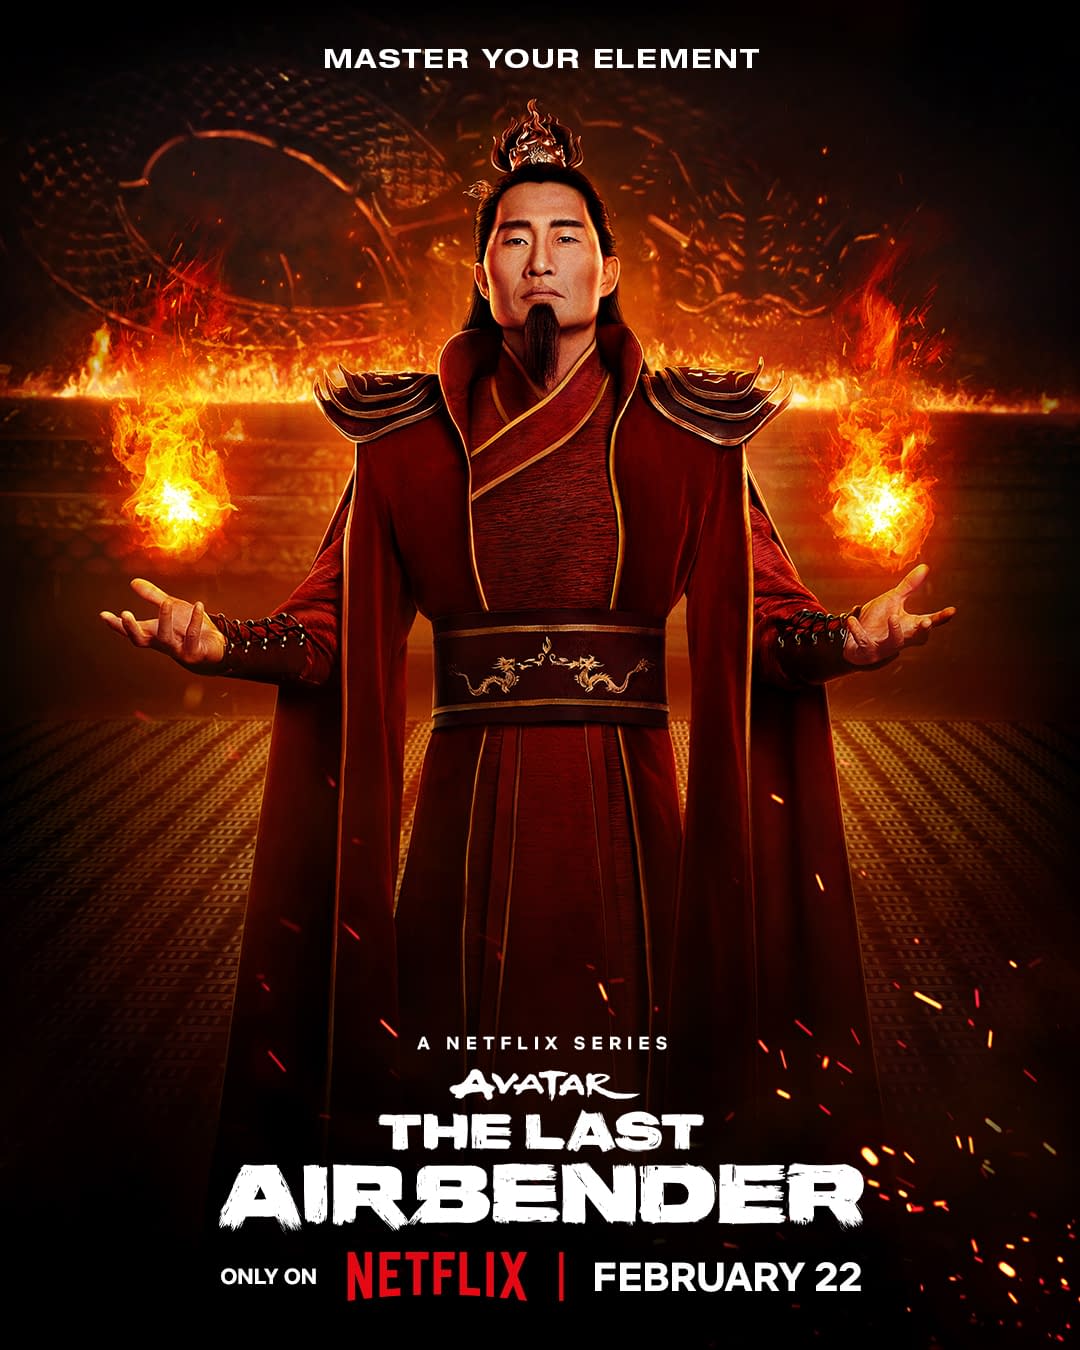 Avatar The Last Airbender Character Posters Spotlight Fire Nation